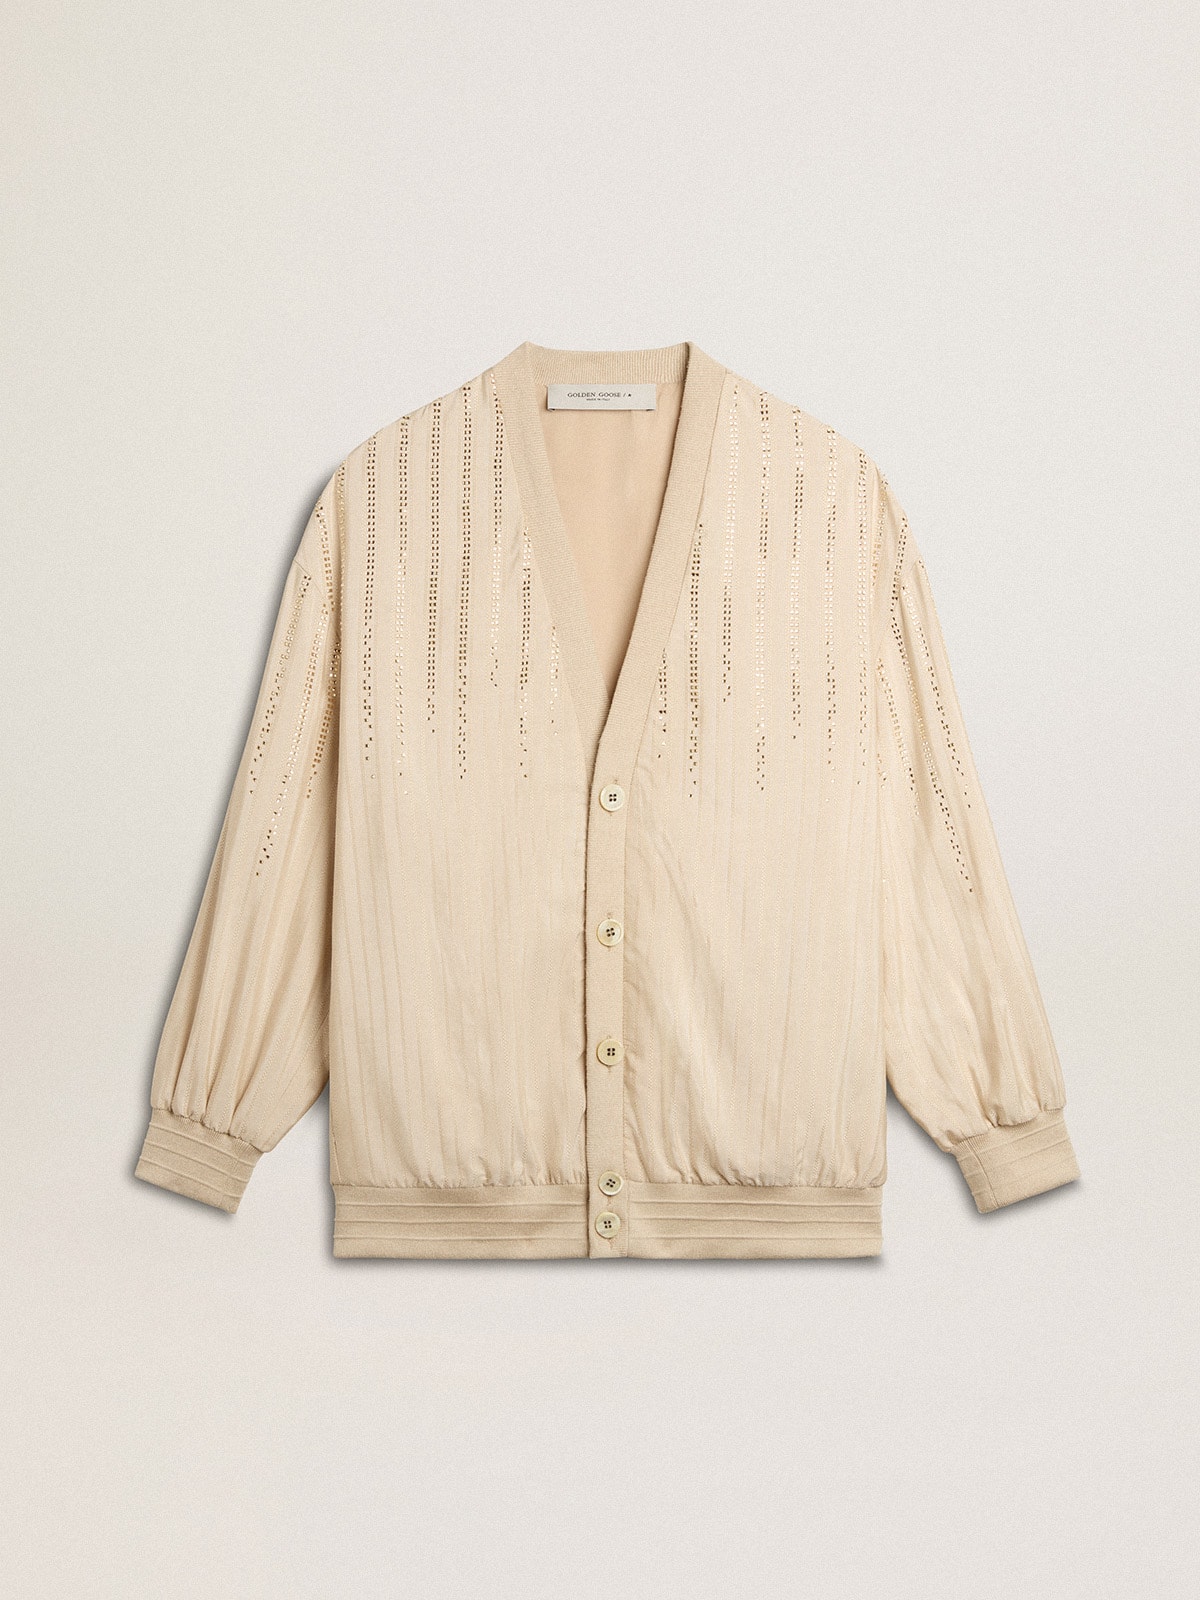 Women's wool and cotton sweaters and cardigans | Golden Goose